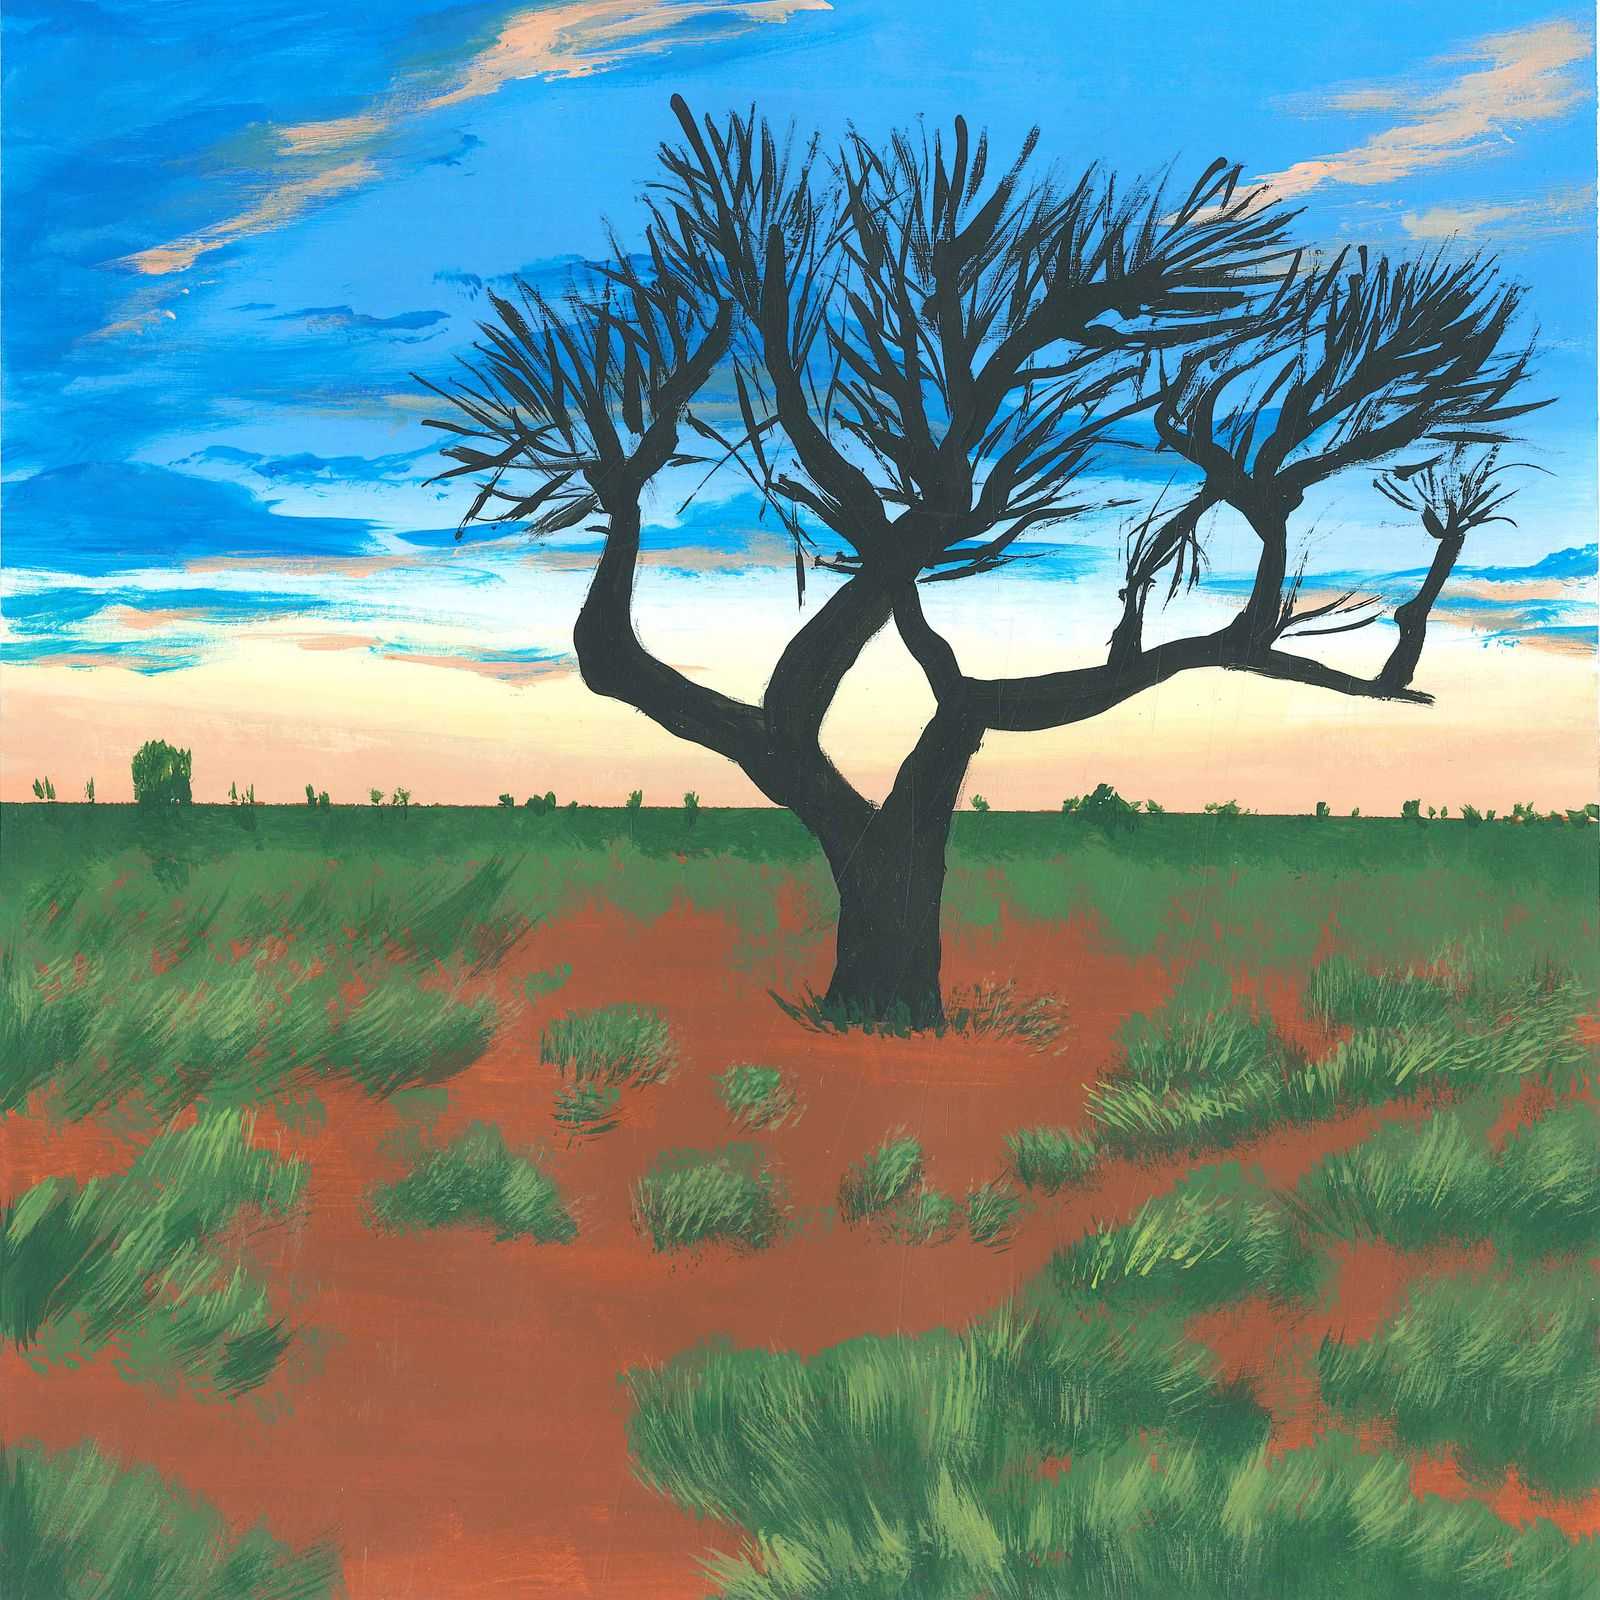 Dry Creek Bed in the Outback - earth.fm